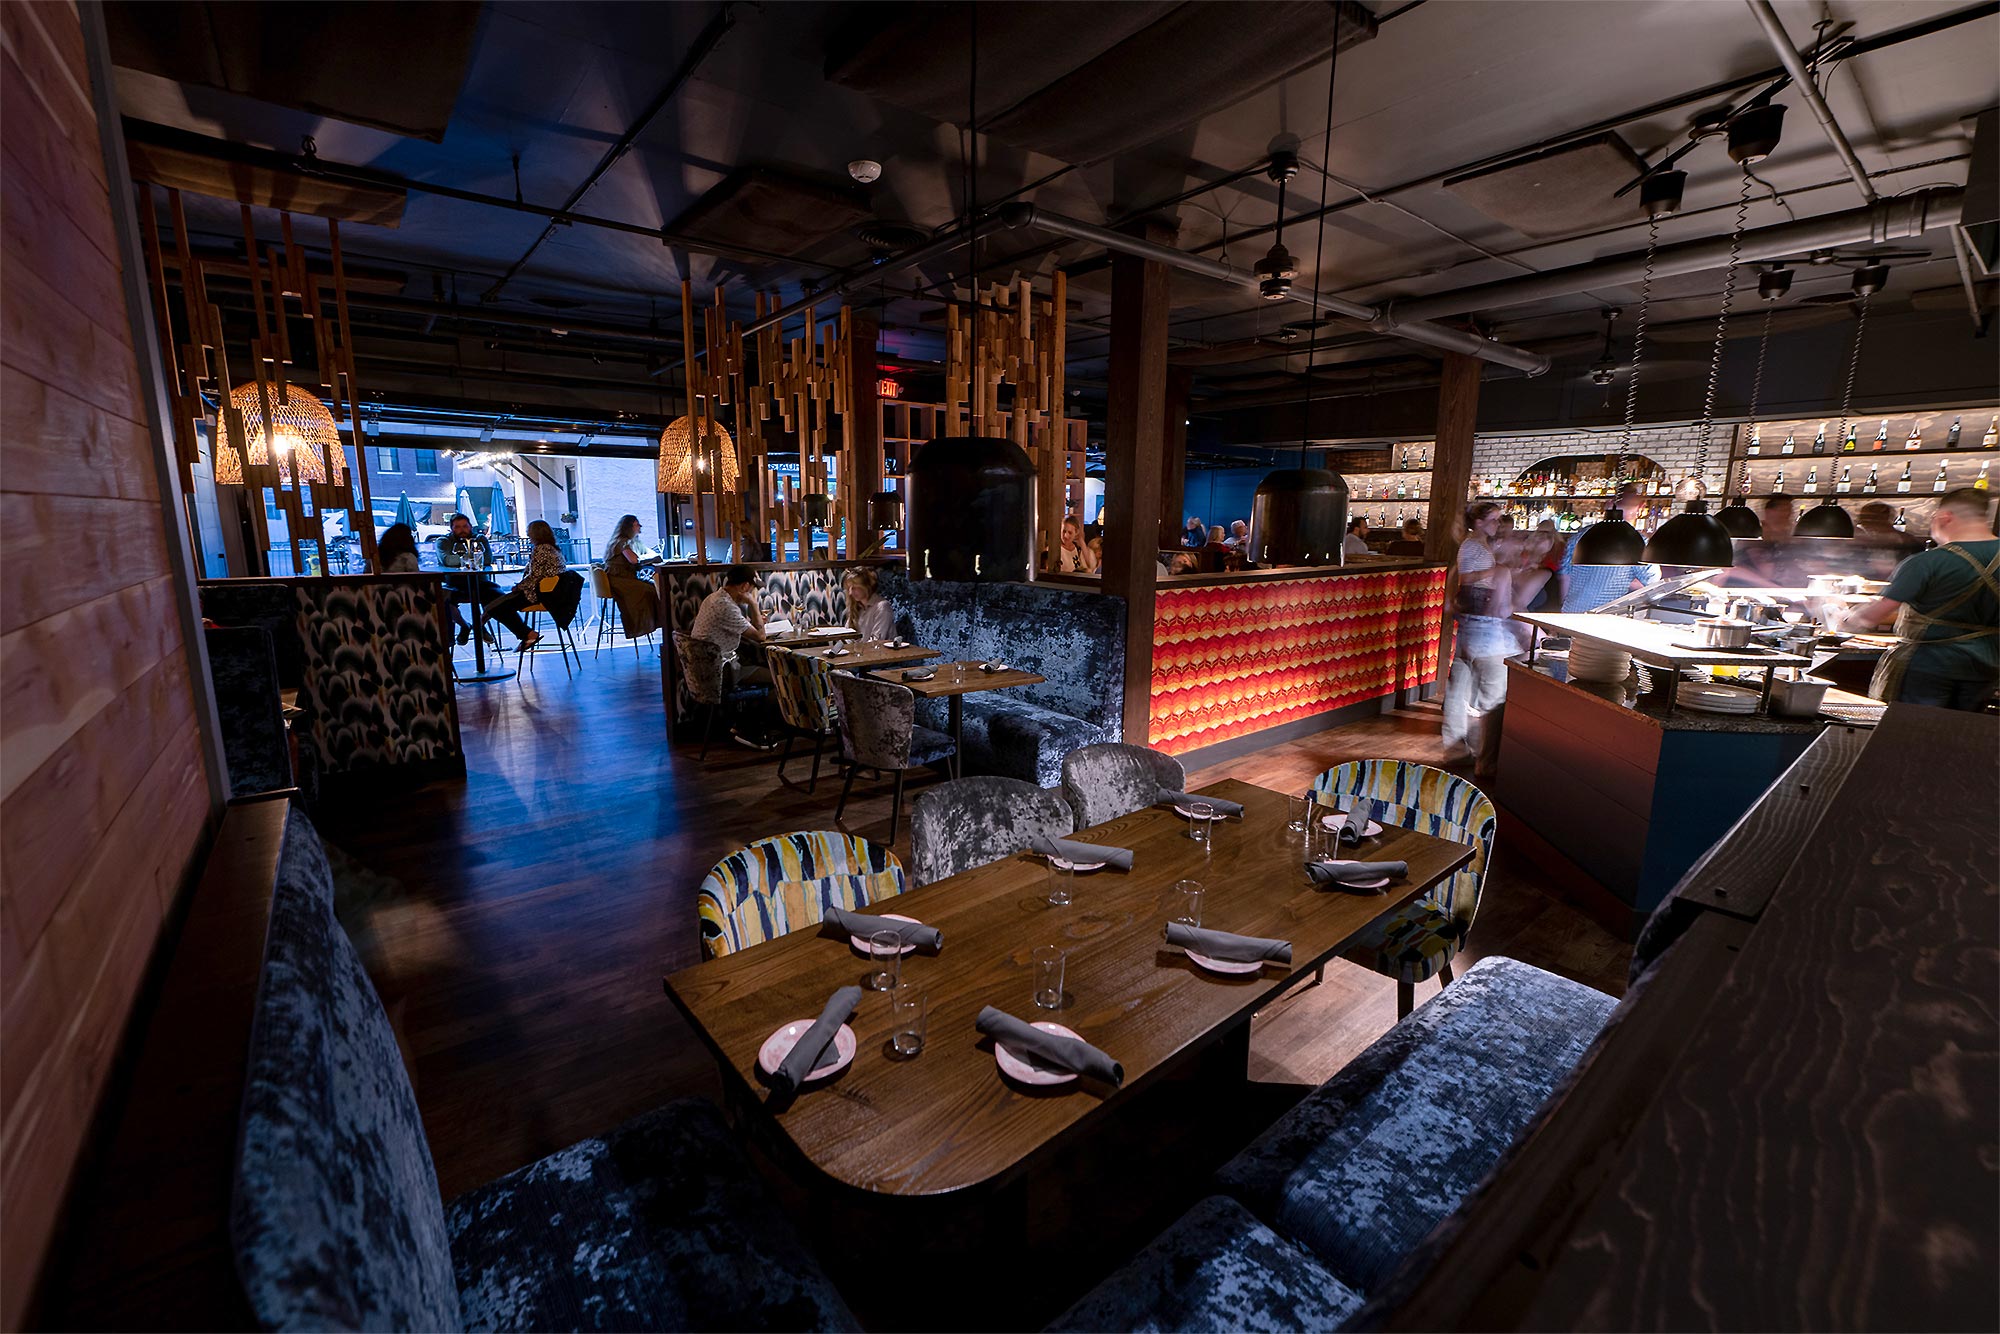 Wide angle view of restaurant seating with patrons at tables, chefs in the open kitchen, and the bar in the background